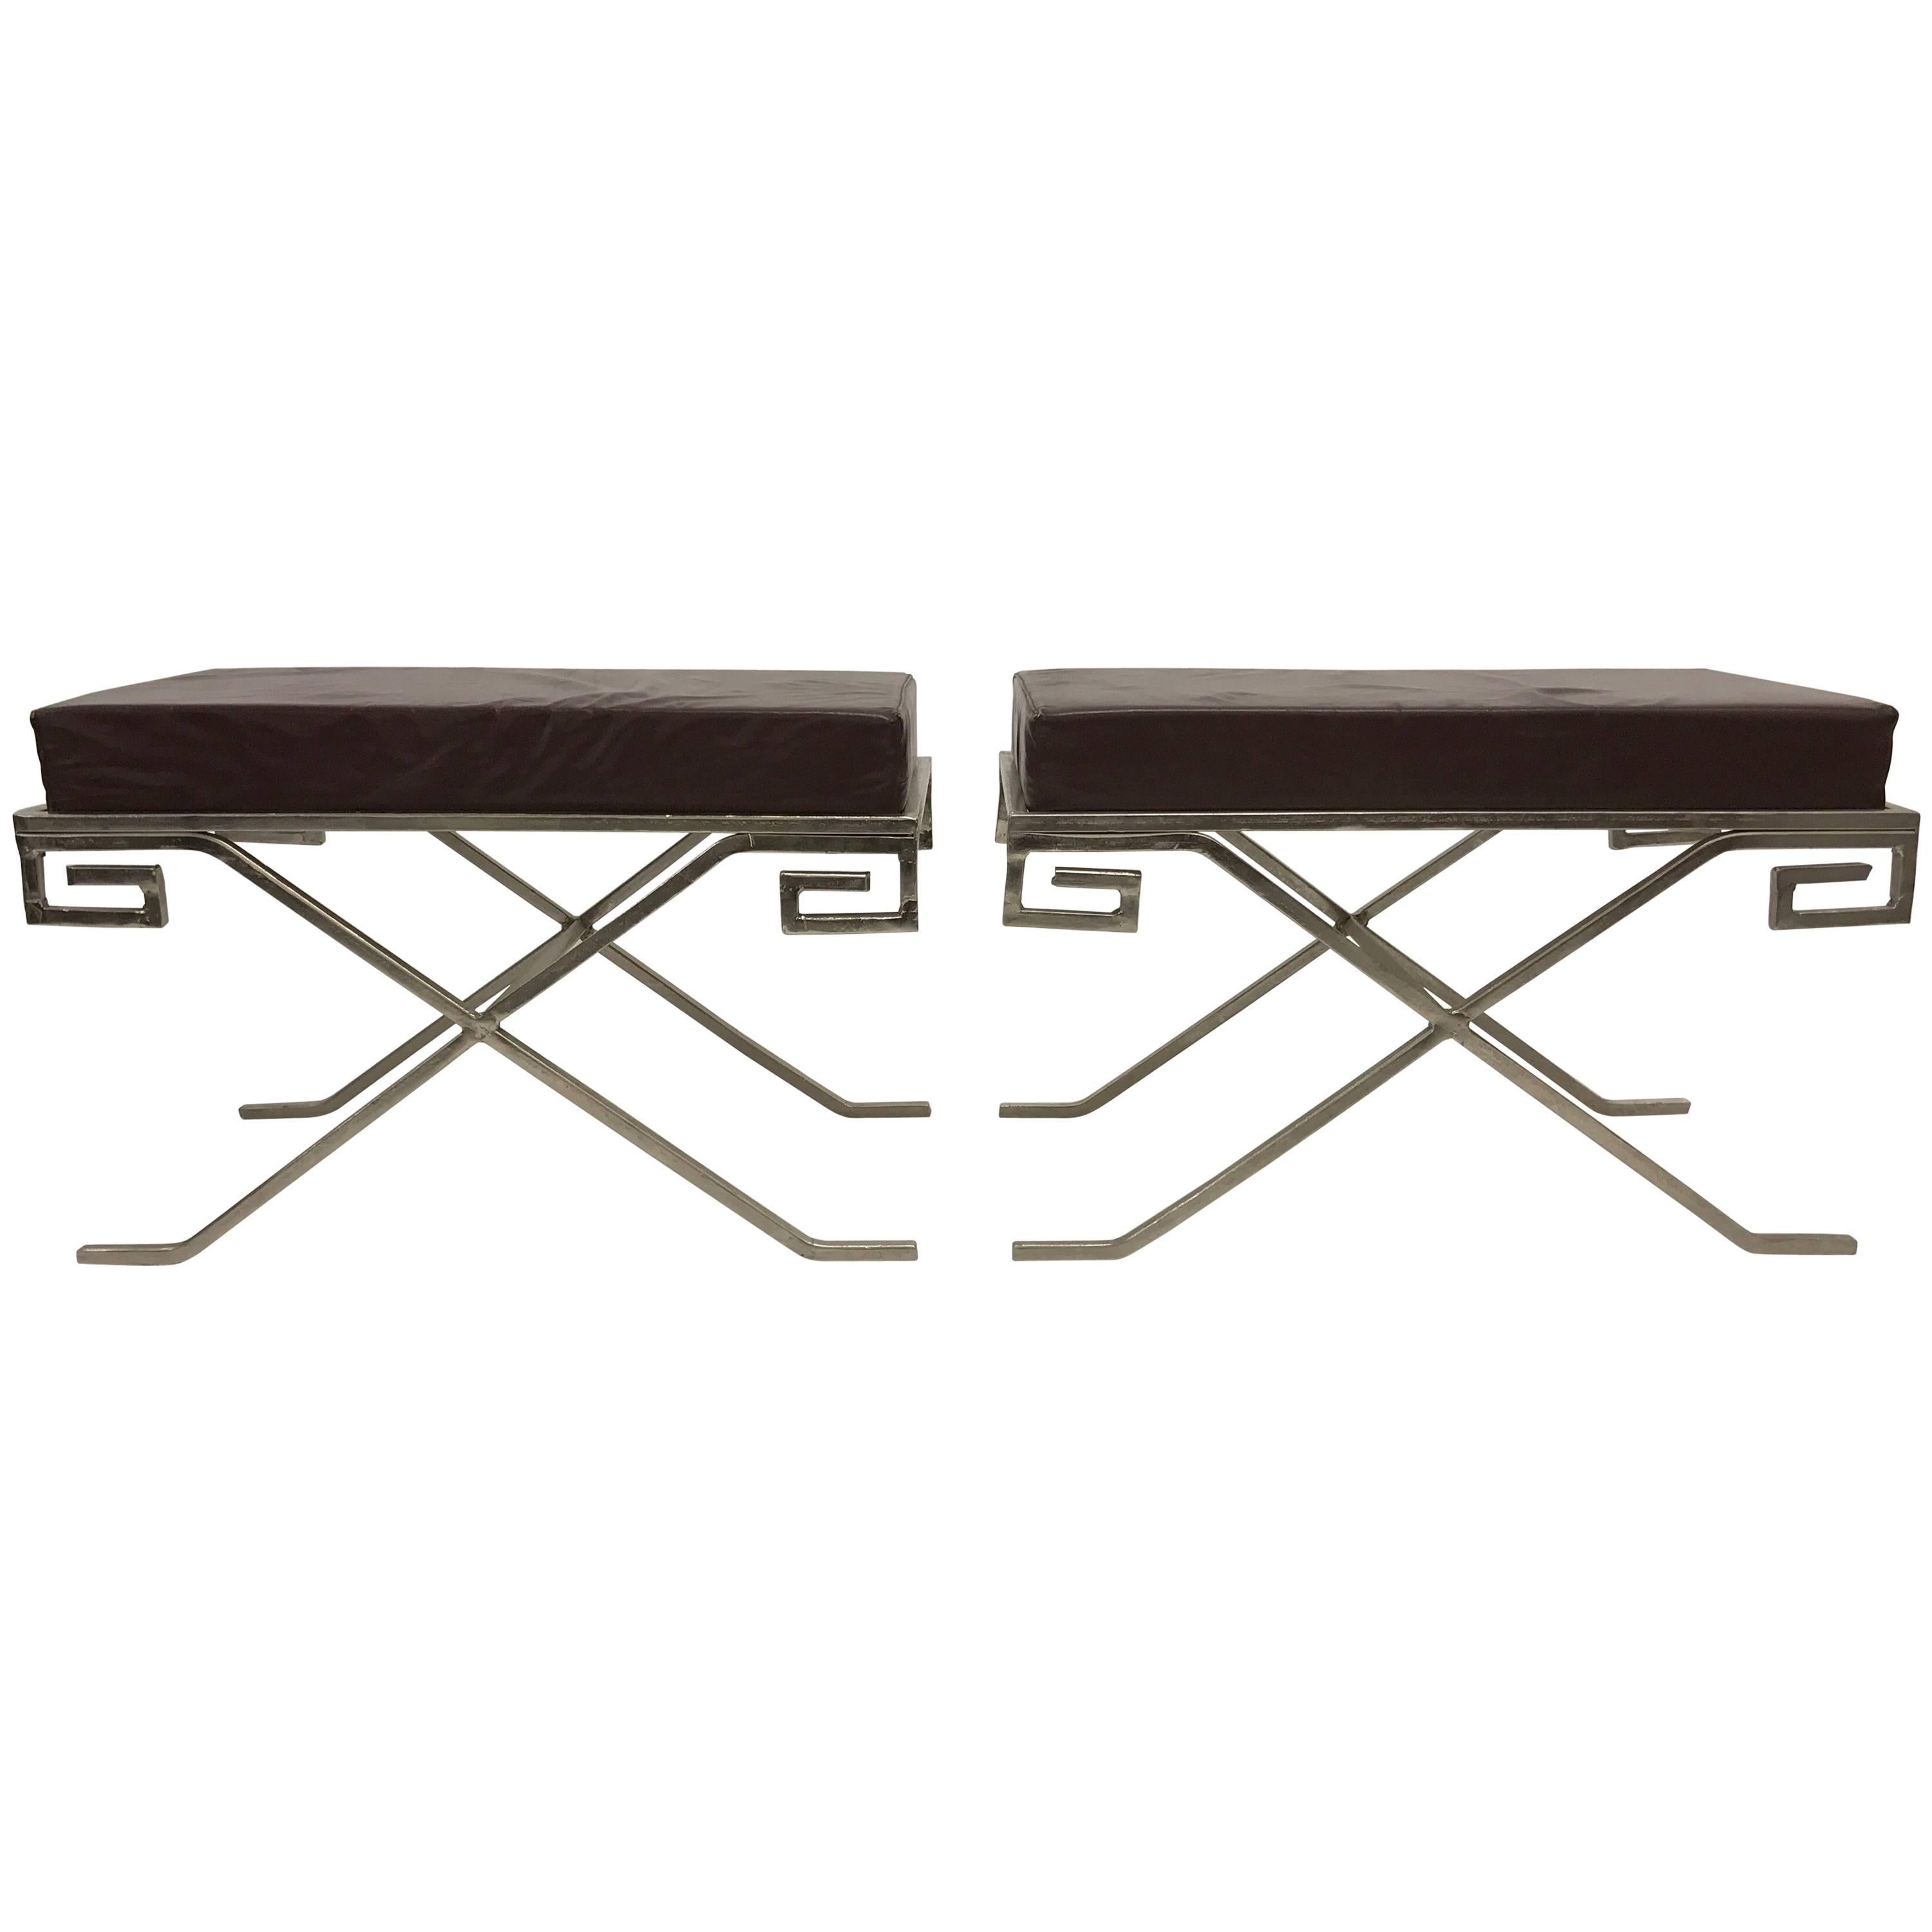 Pair of Modern Greek Key Neoclassical Benches after Jean Michel Frank For Sale